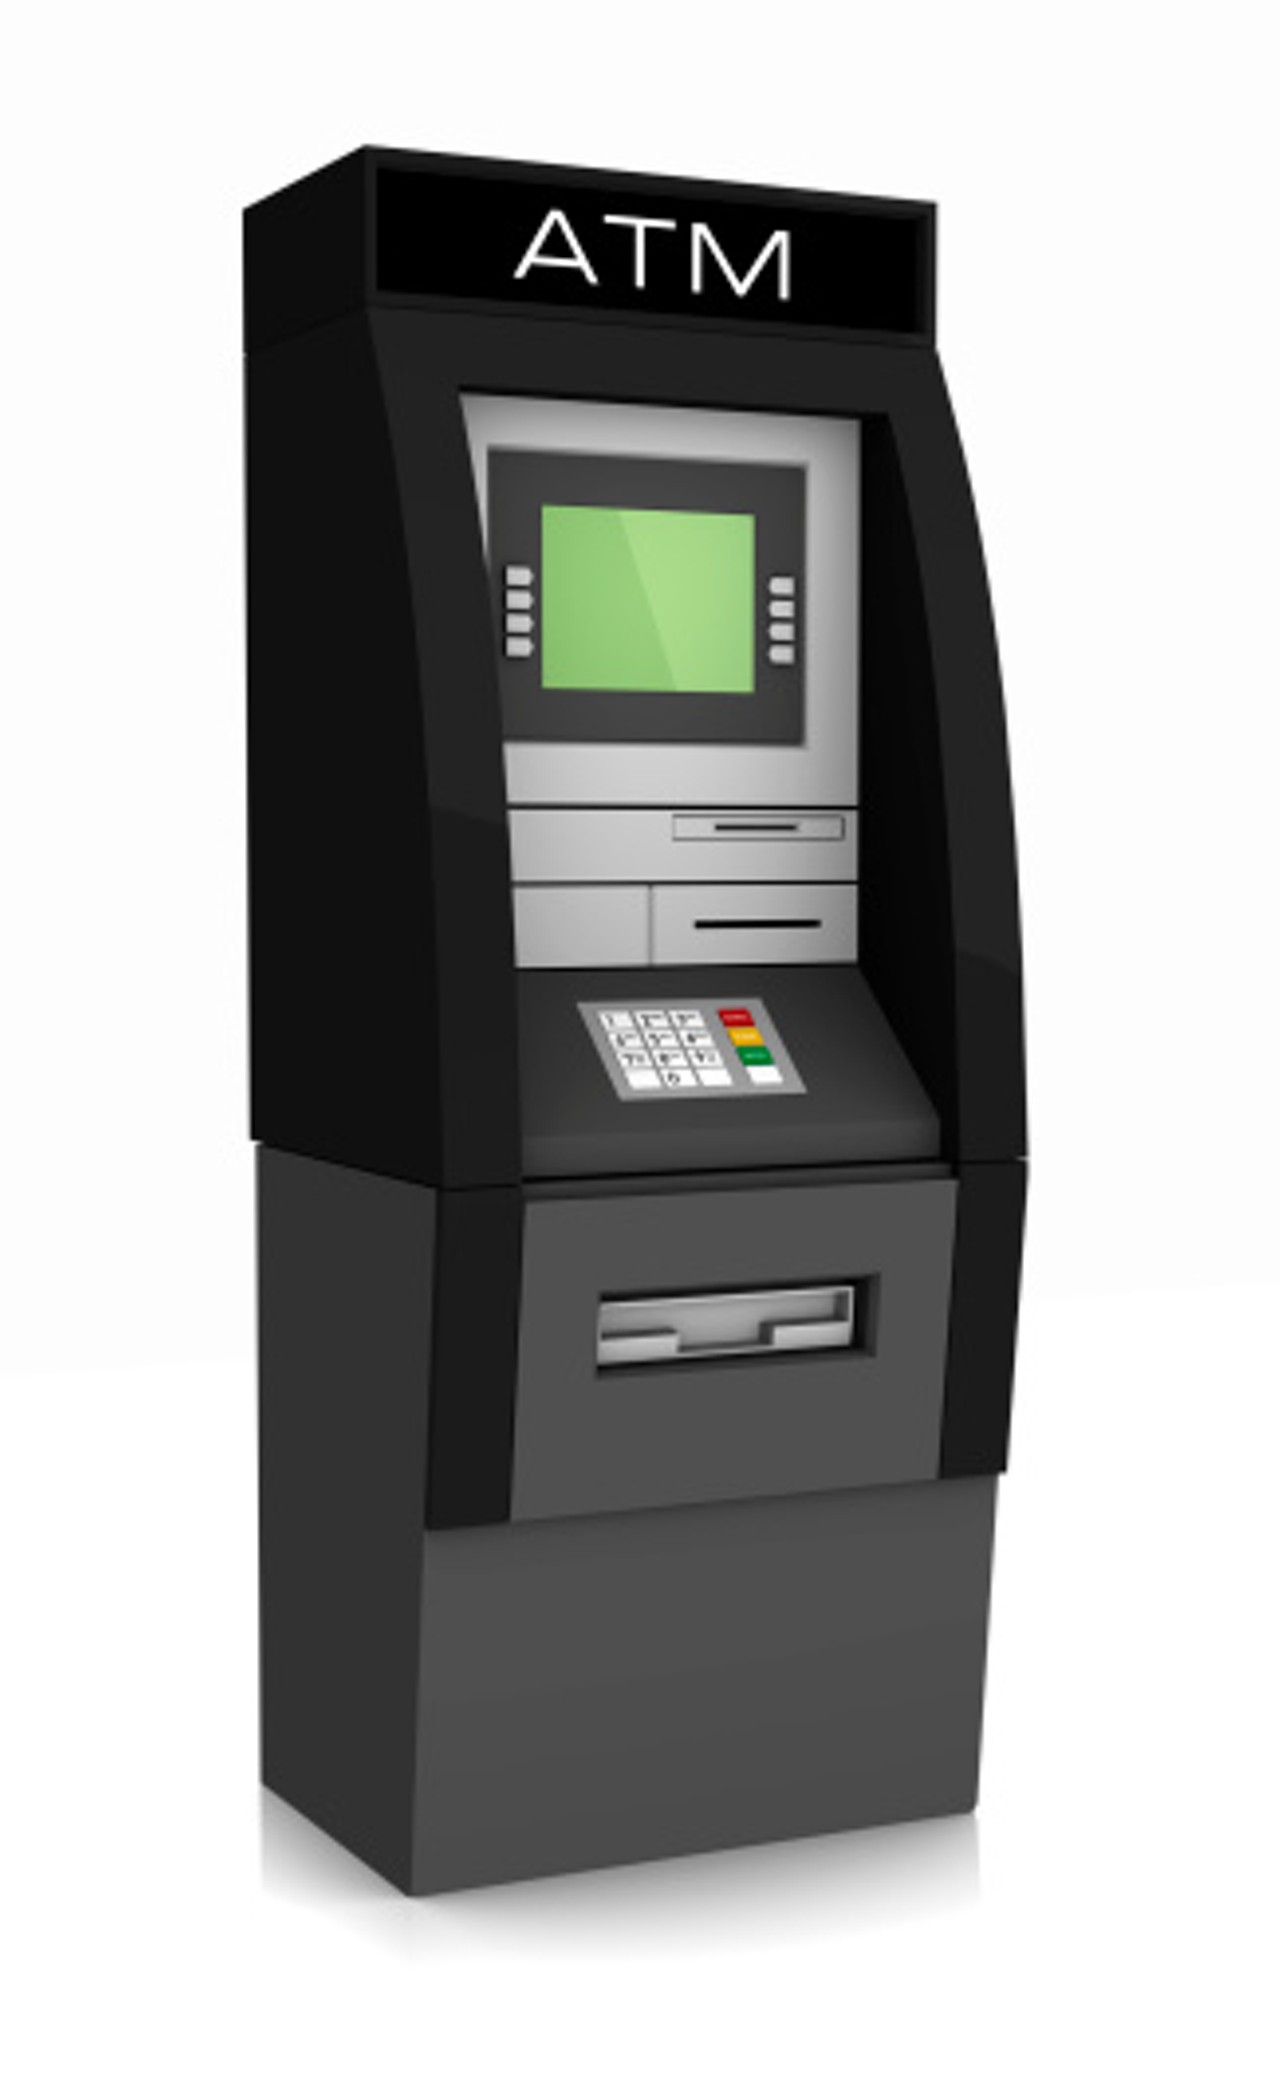 Atm pictures clip art clipart collection jpg